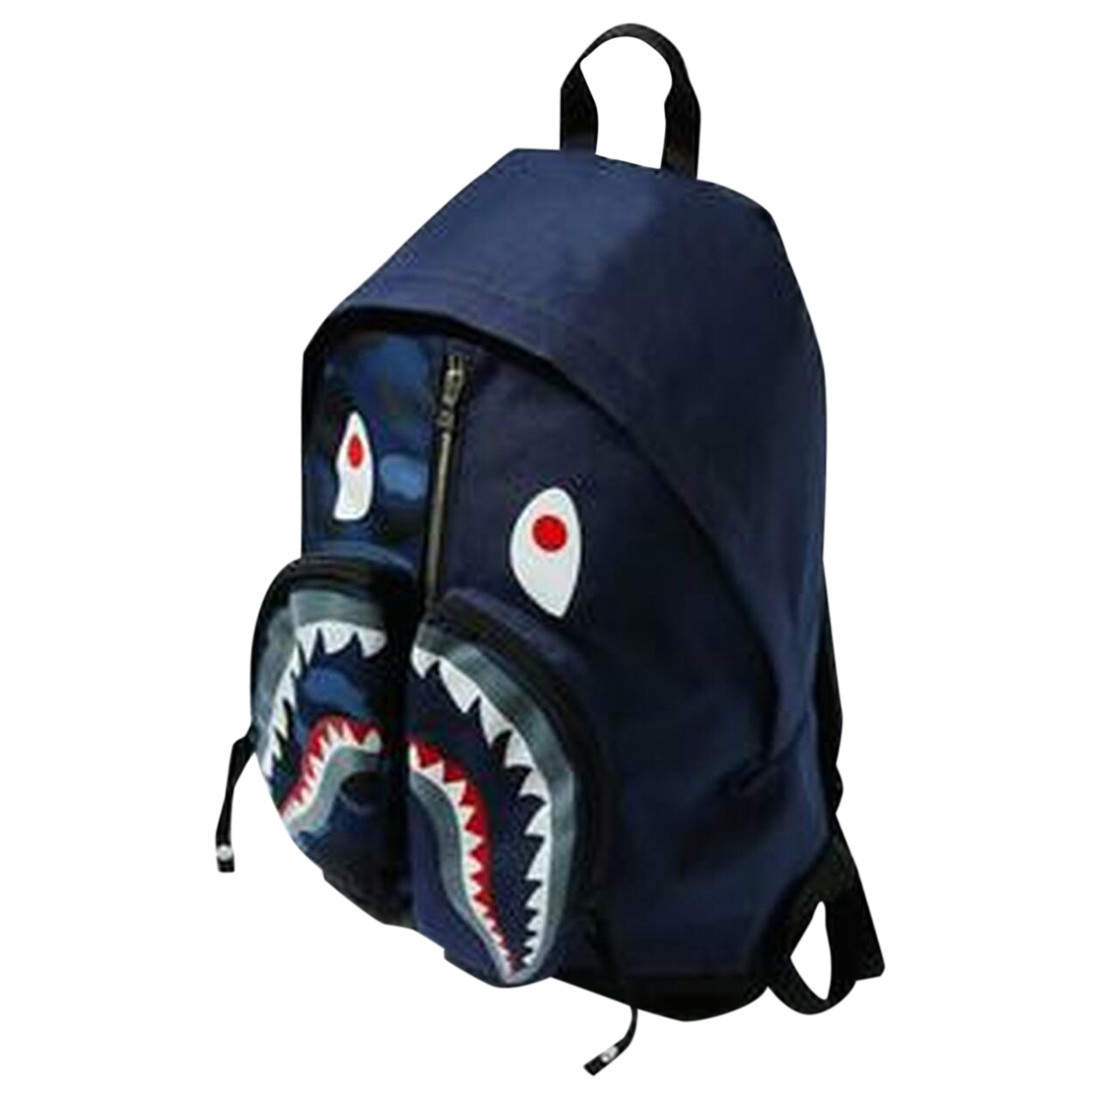 A BATHING APE® Color Camo Tiger Backpack - Farfetch